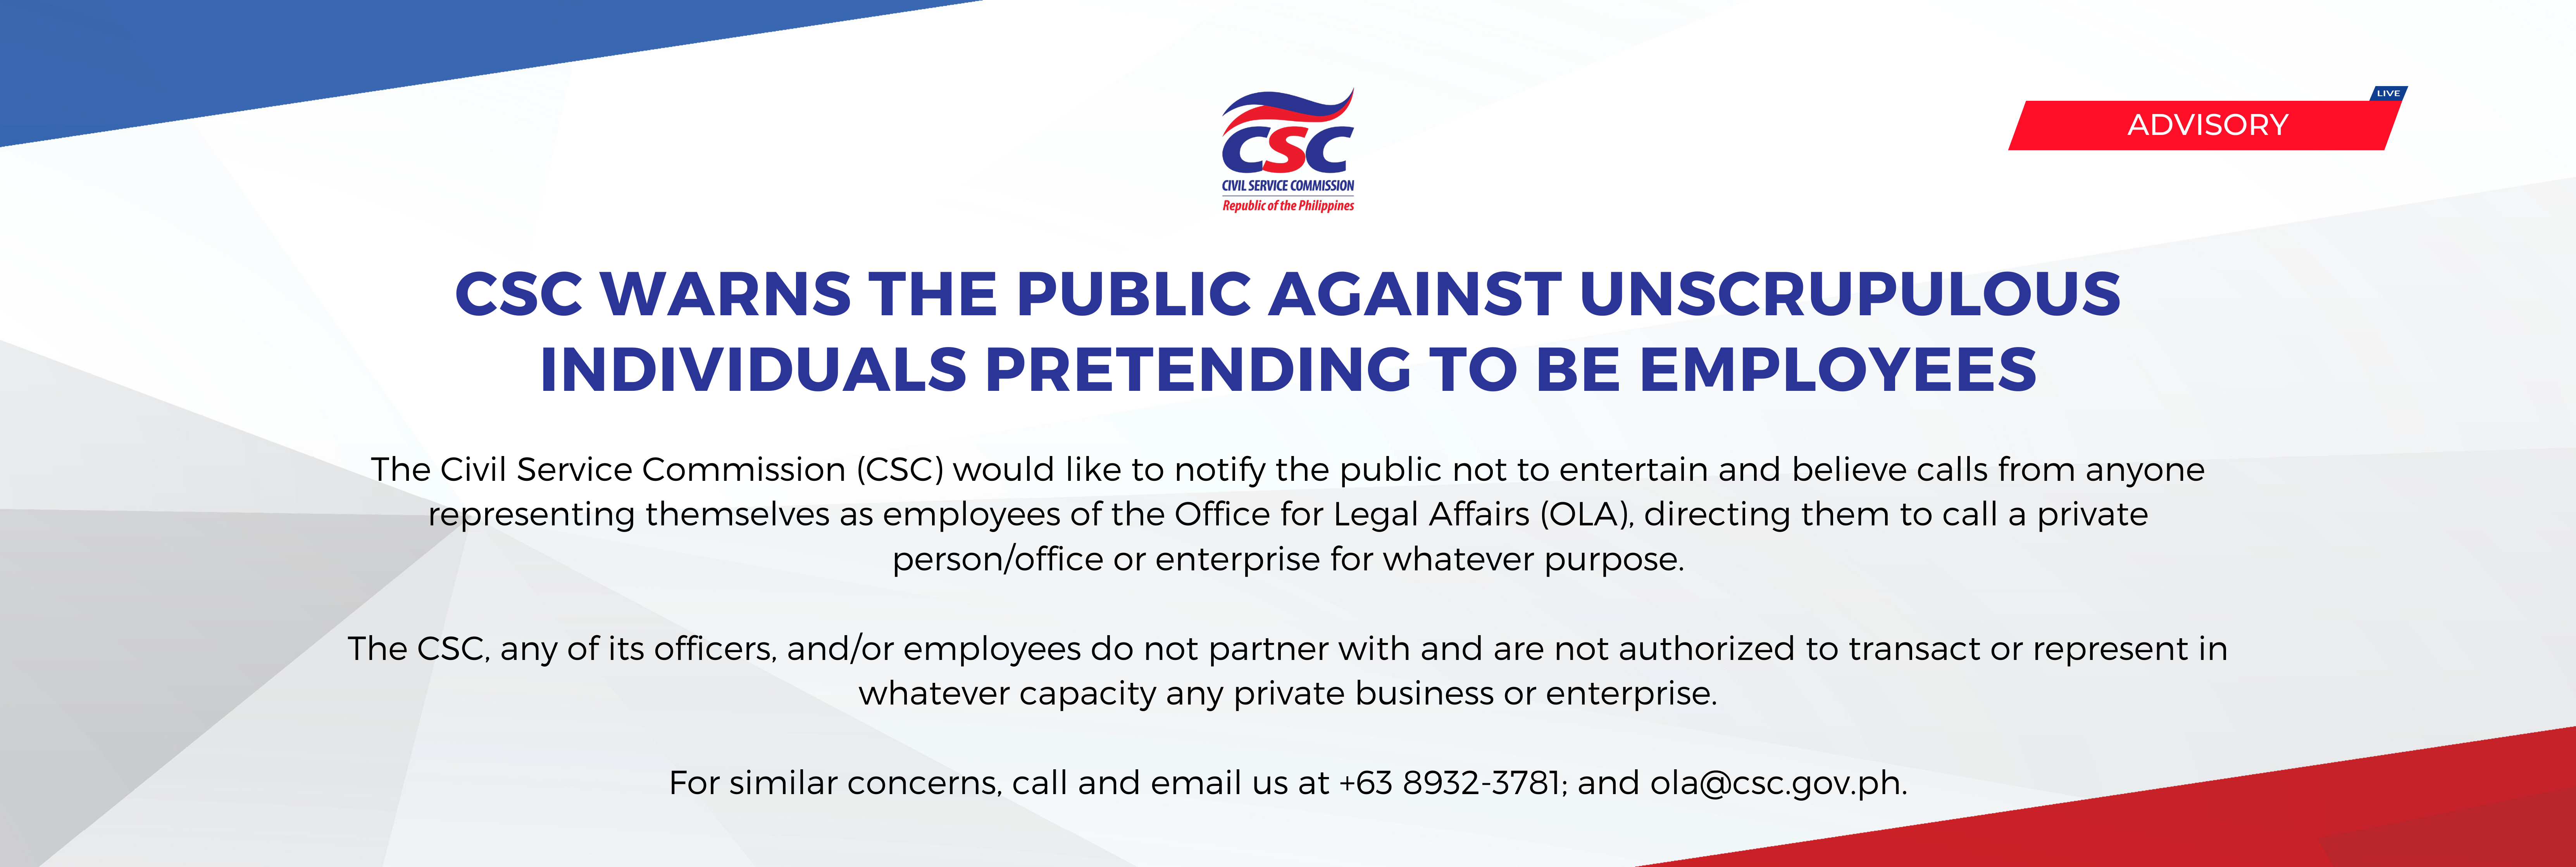 CSC warns the public against unscrupulous individuals pretending to be employees